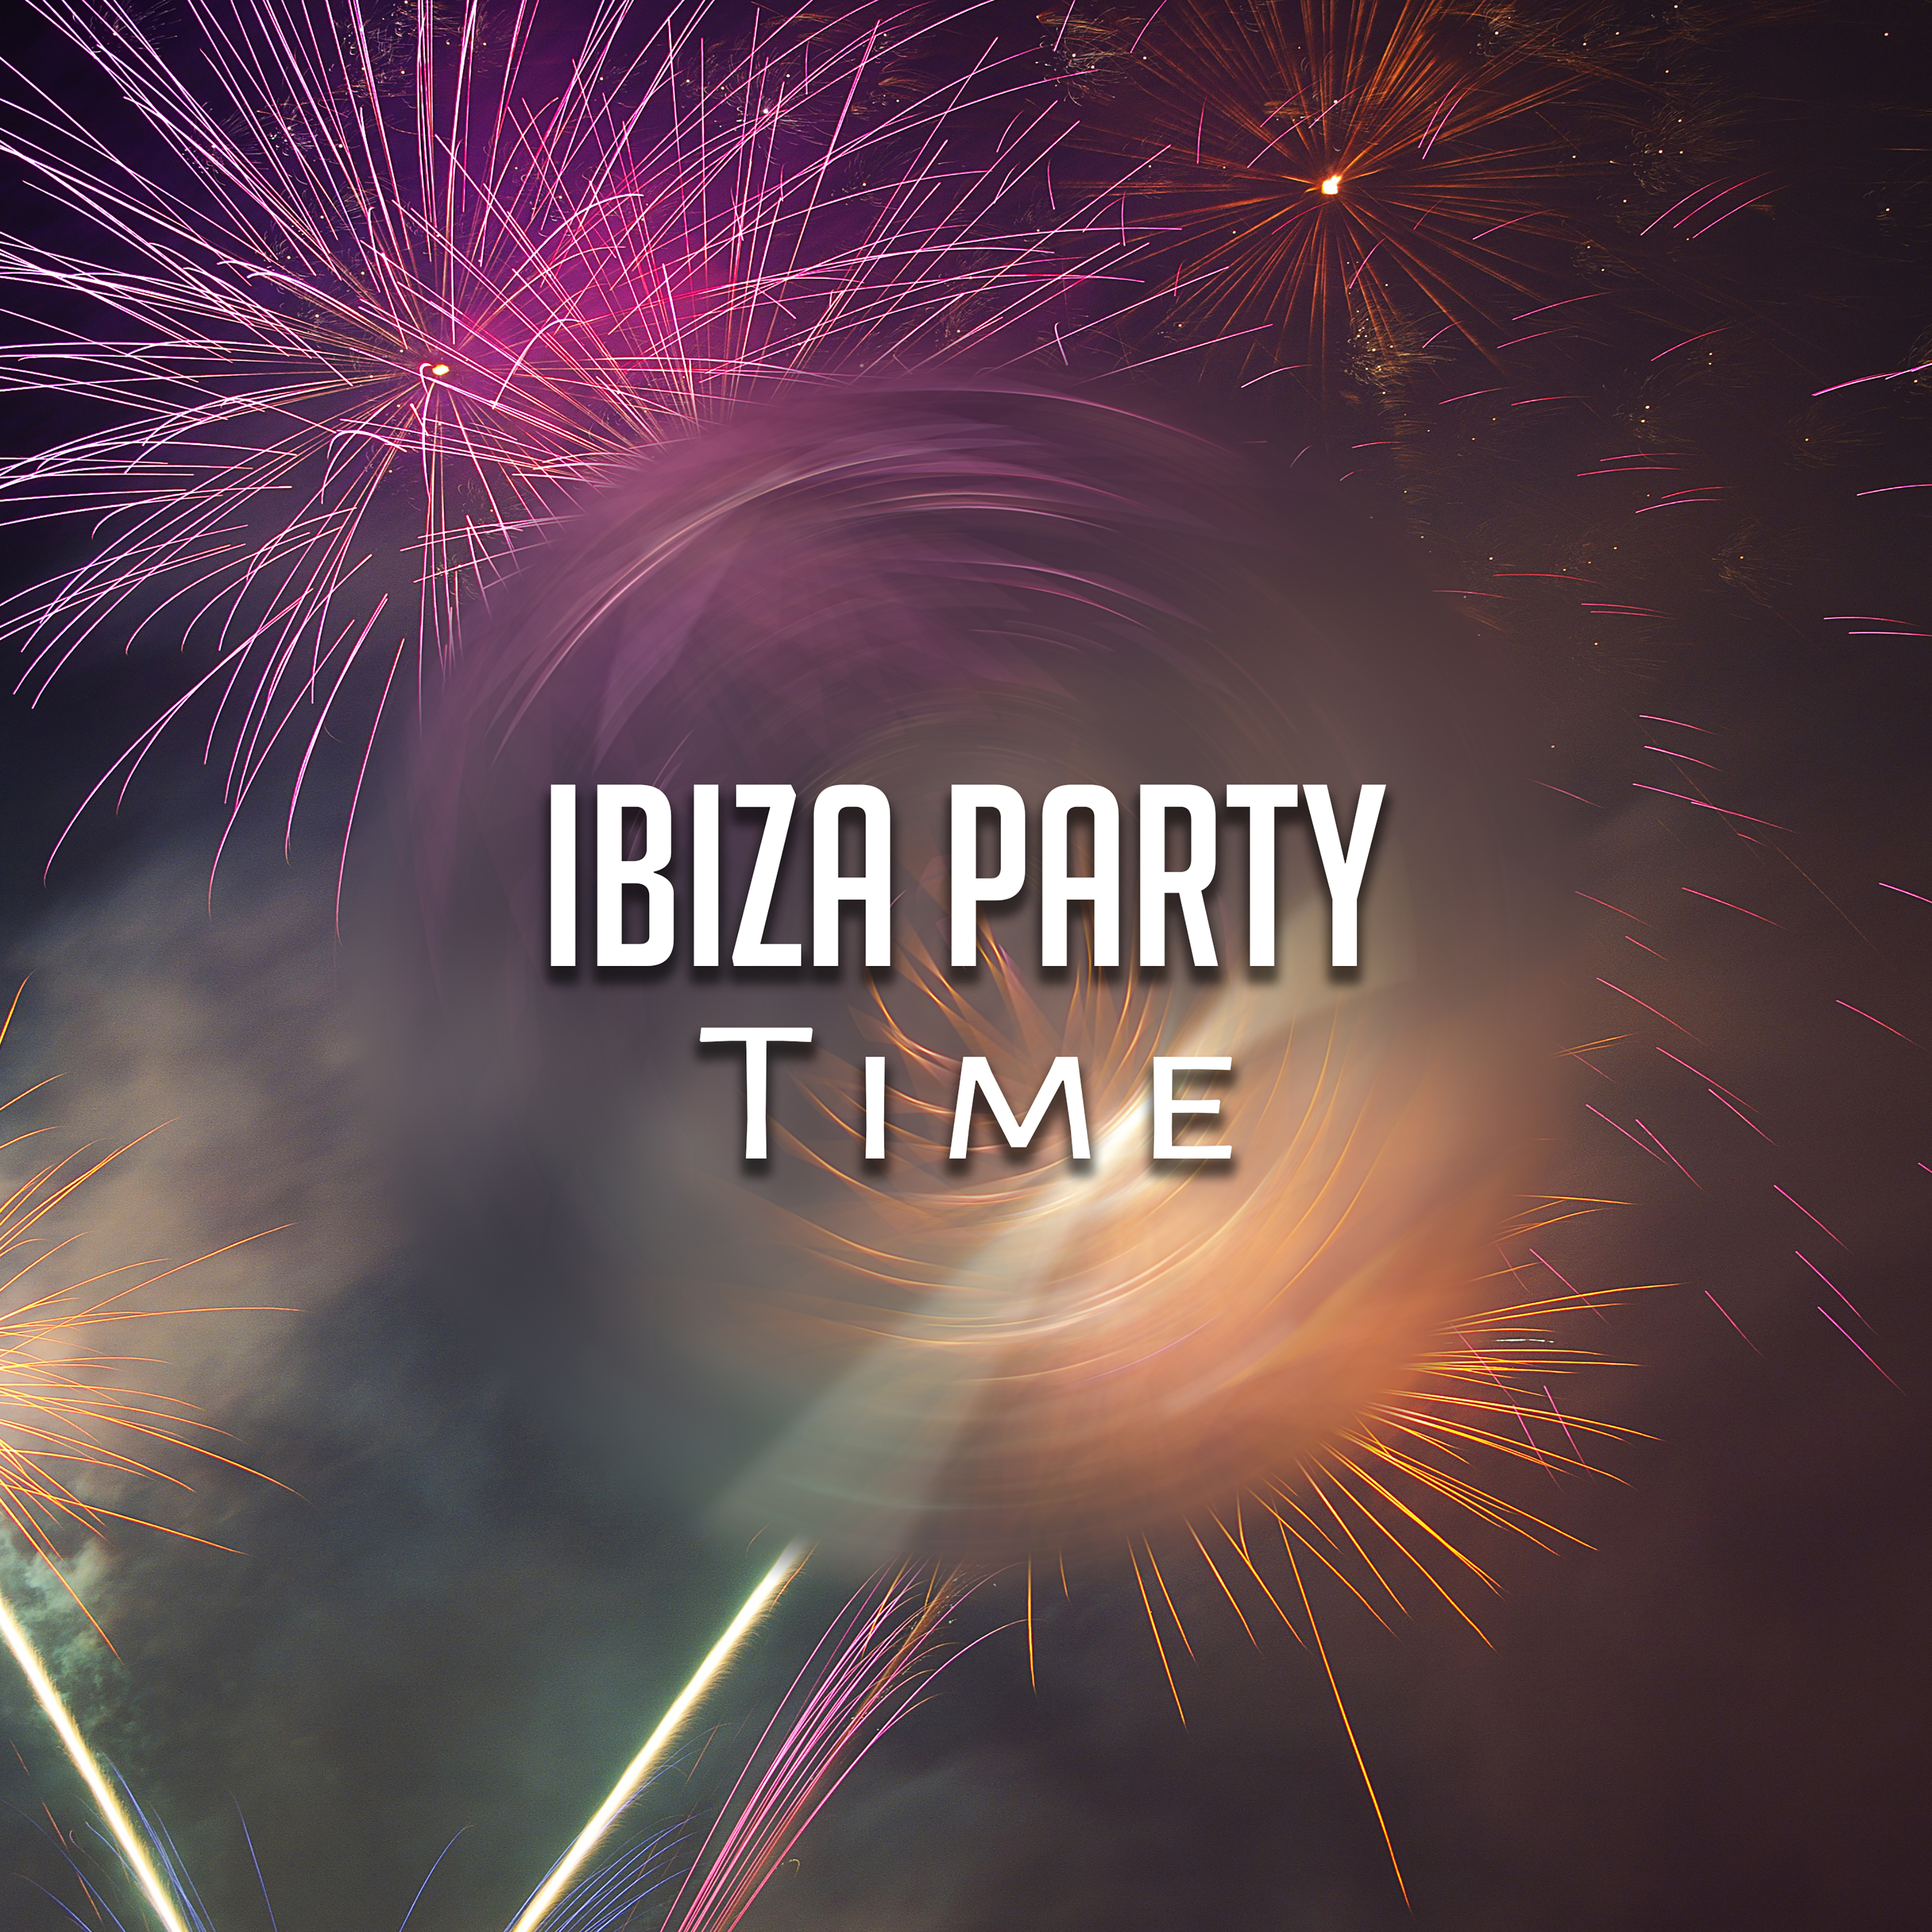 Ibiza Party Time – Summer Hits, Beach Party Time, Hot Music, Cold Drinks